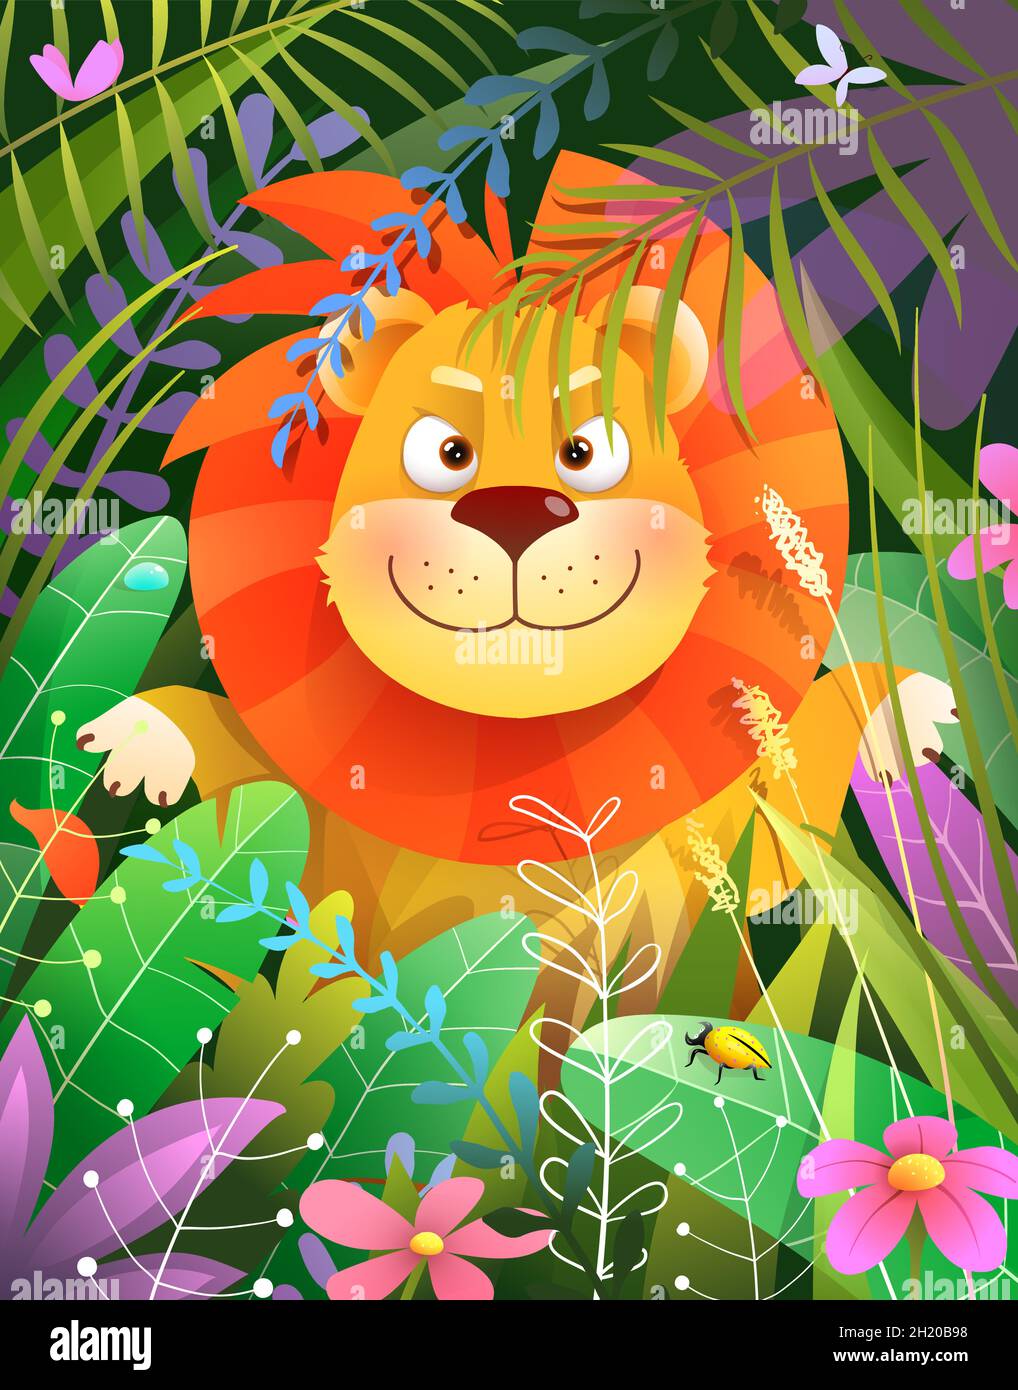 https://c8.alamy.com/comp/2H20B98/little-curious-baby-lion-in-jungle-forest-2H20B98.jpg